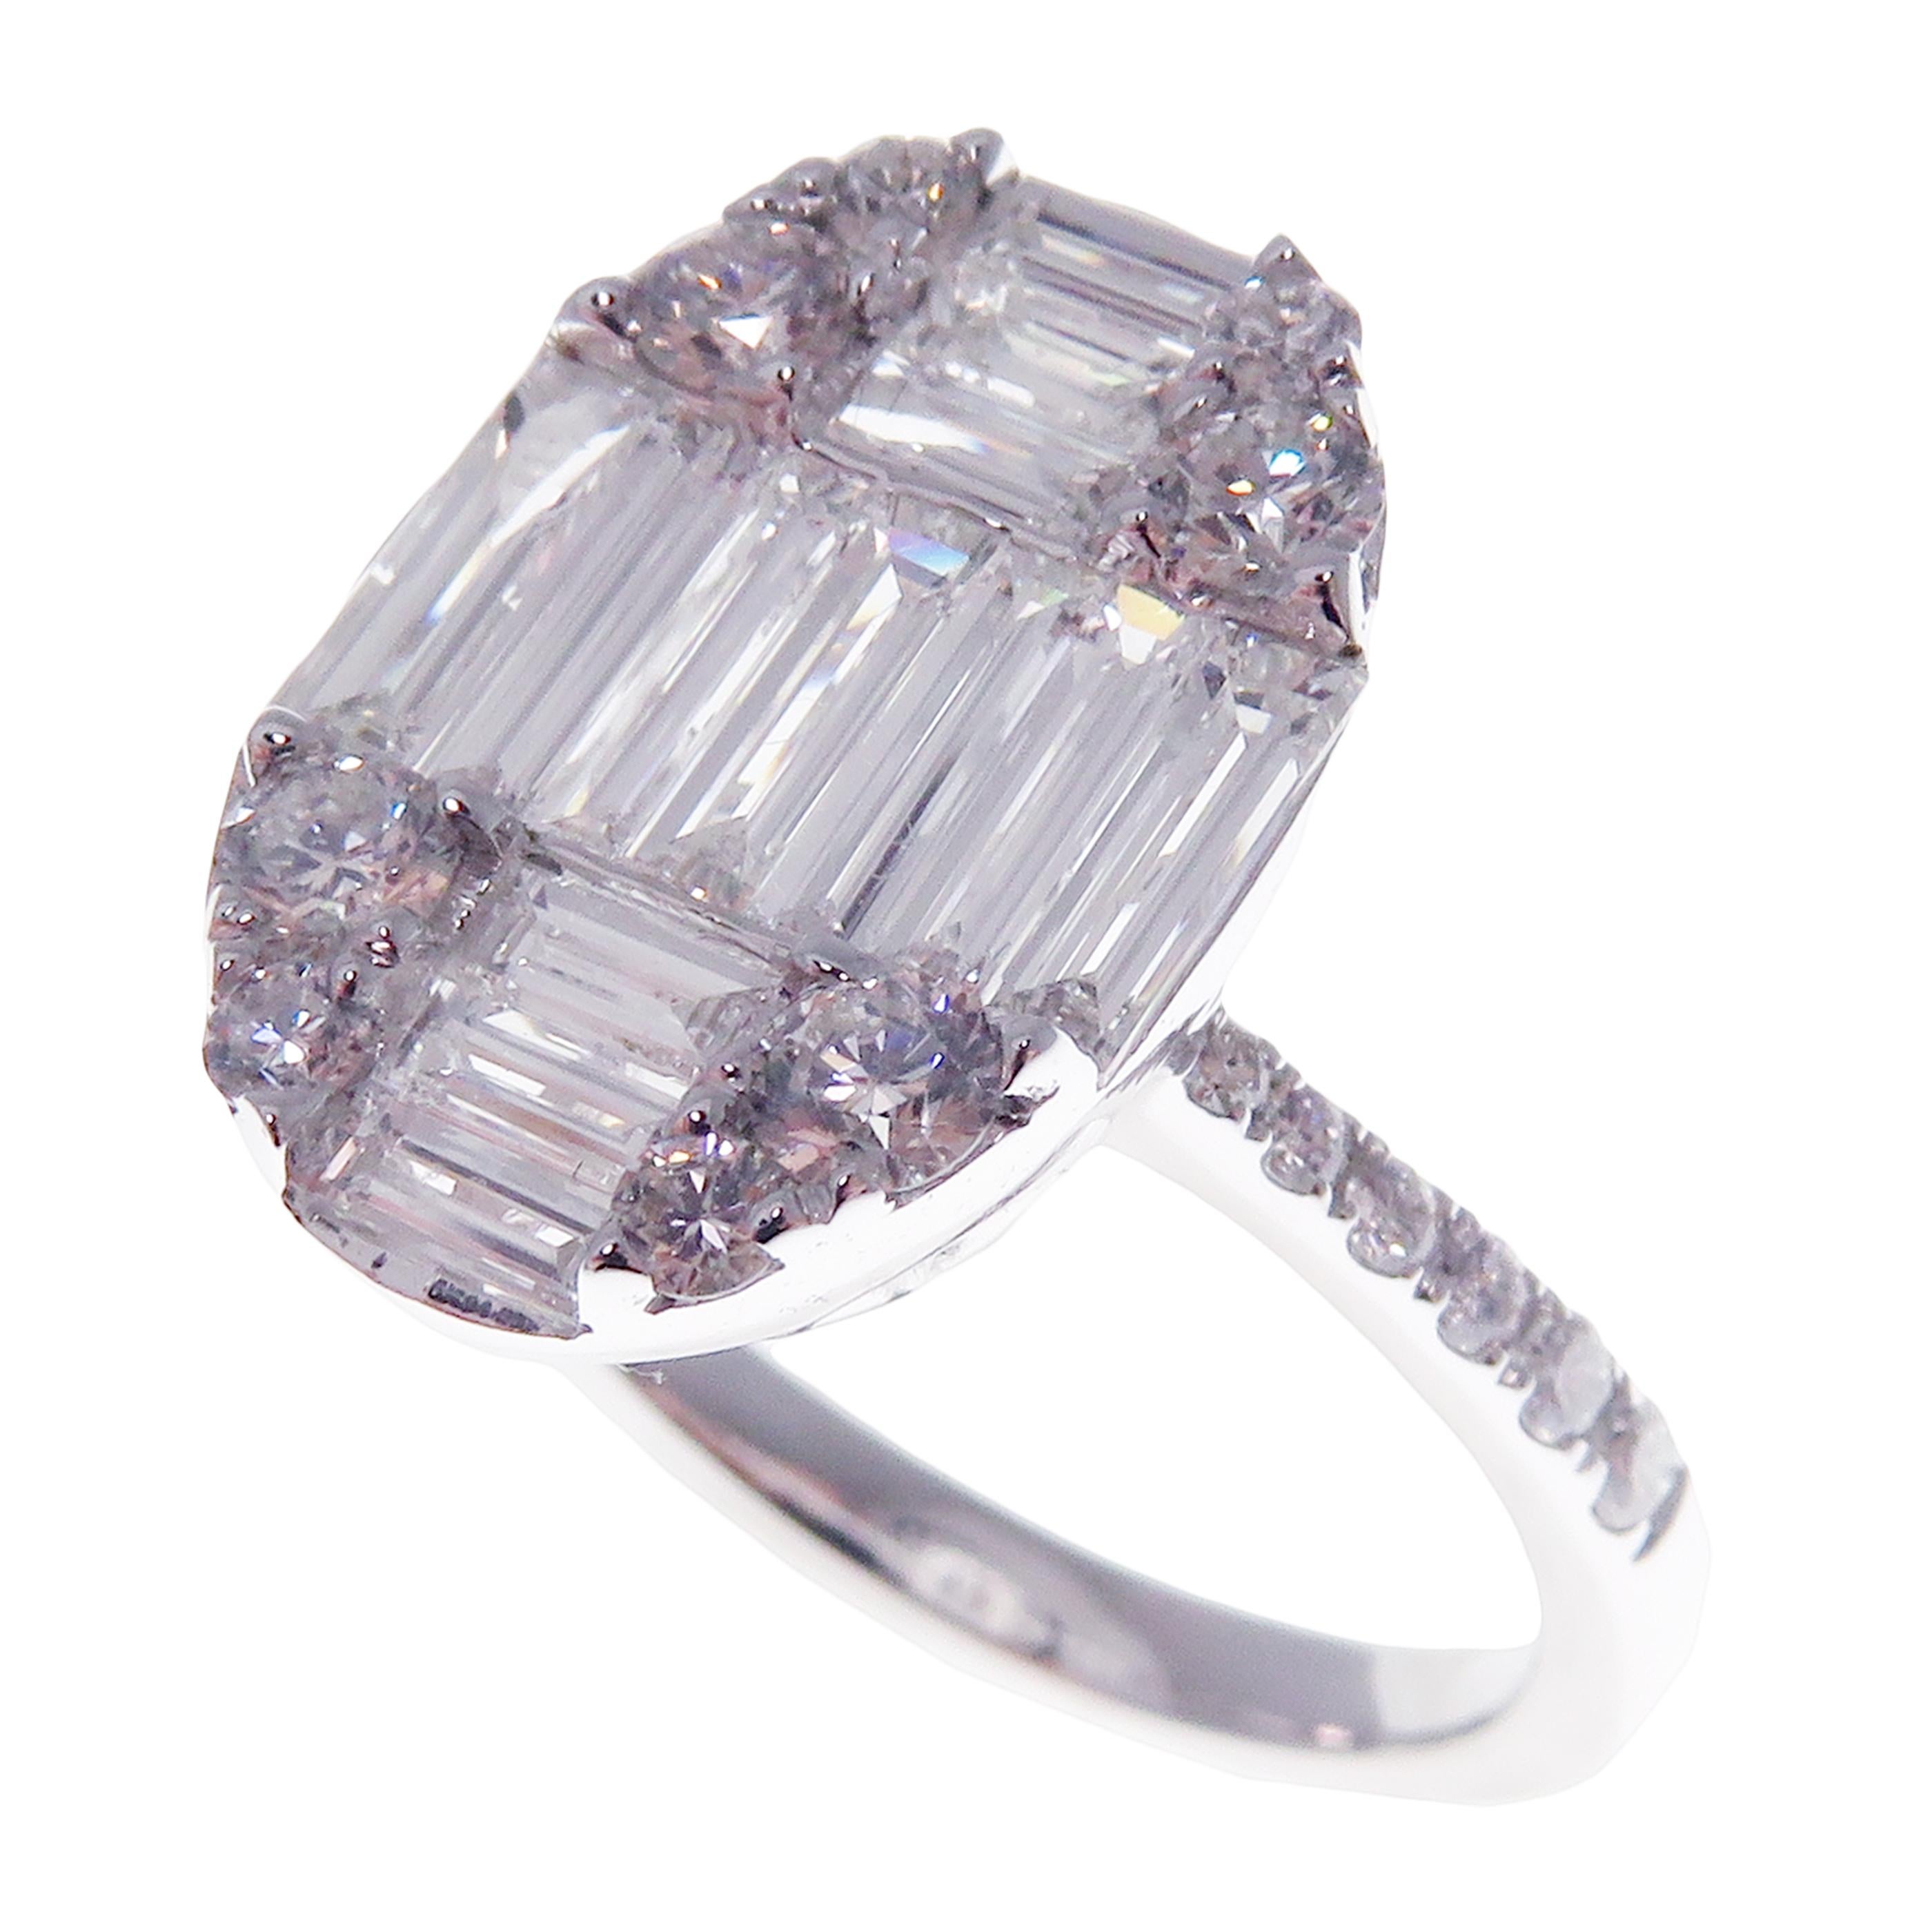 This baguette, diamond ring is crafted in 18-karat white gold, weighing approximately 1.77 total carats of SI-V Quality white diamonds. This ring is comfortable and can be sized 